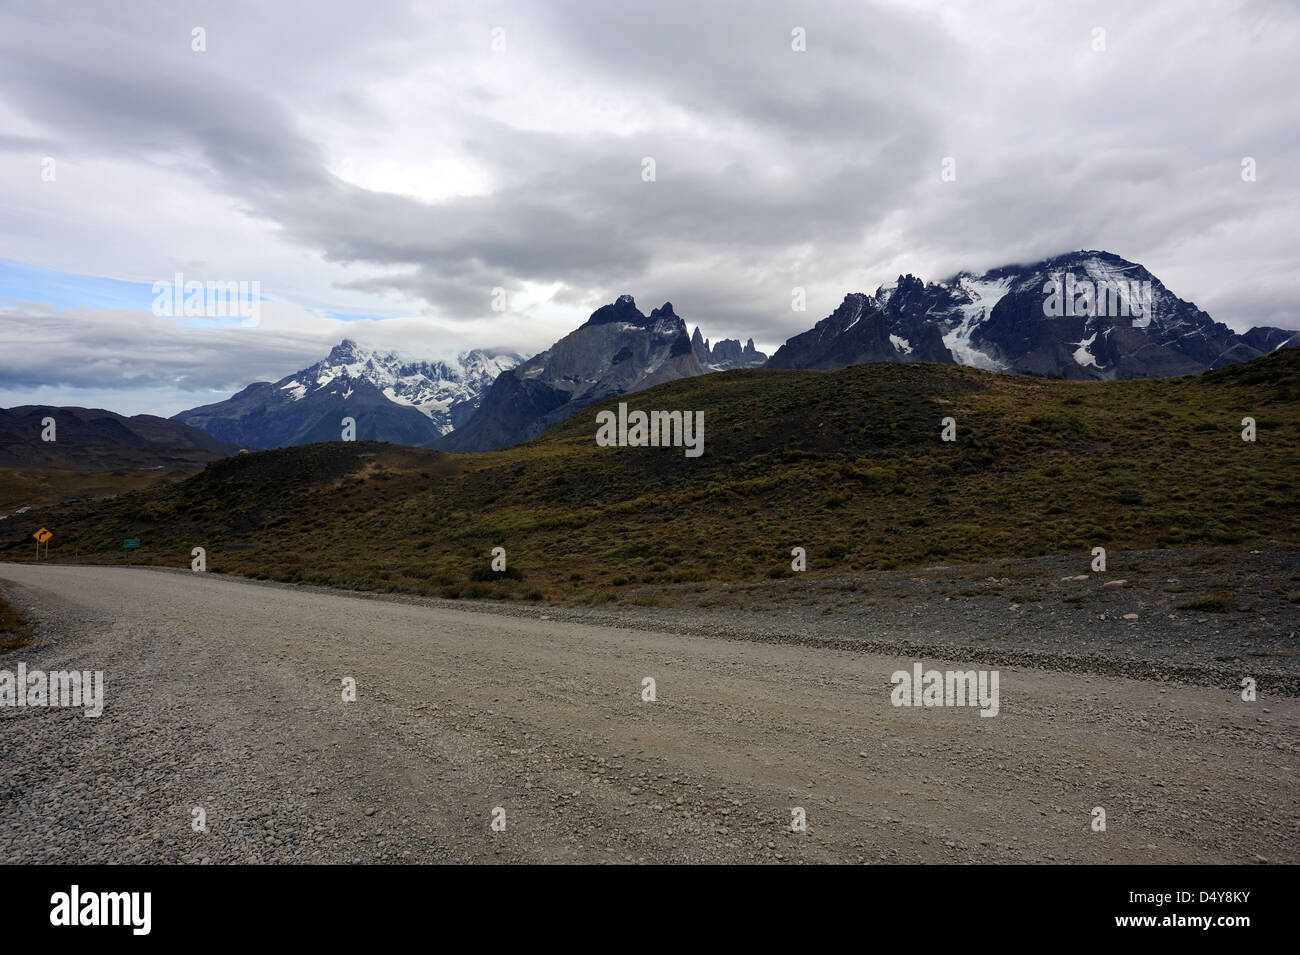 The Torres del Paine Massif looking from the south. Stock Photo